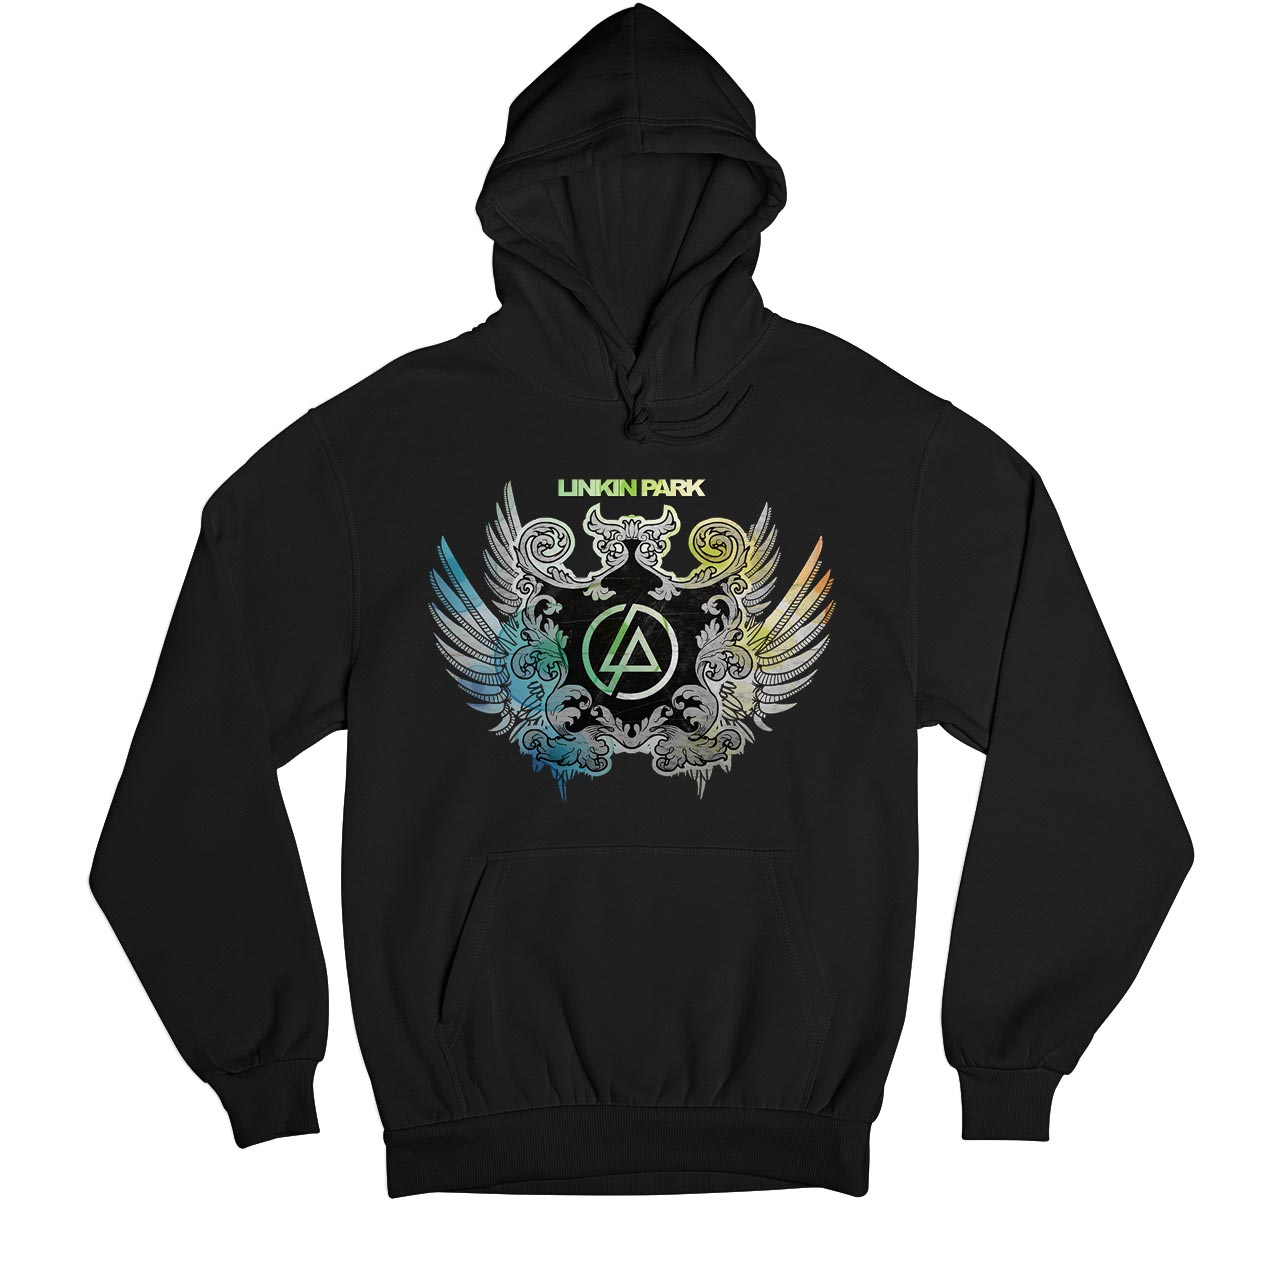 Linkin Park Hoodie - On Sale - XL (Chest size 46 IN)